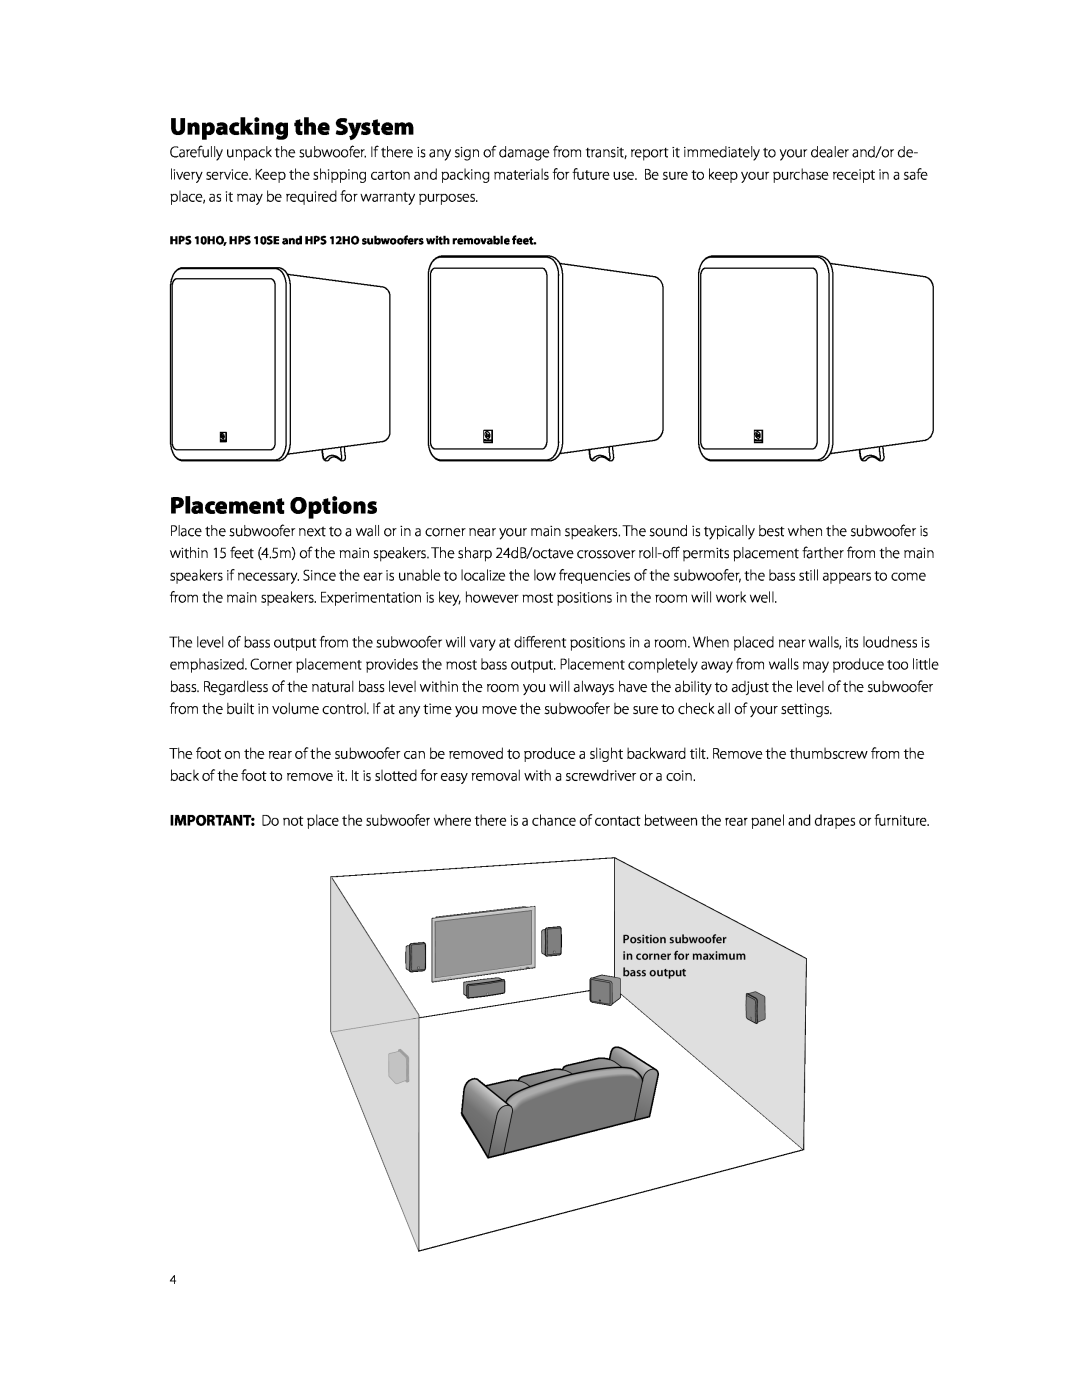 Boston Acoustics HPS10HO owner manual Unpacking the System, Placement Options 